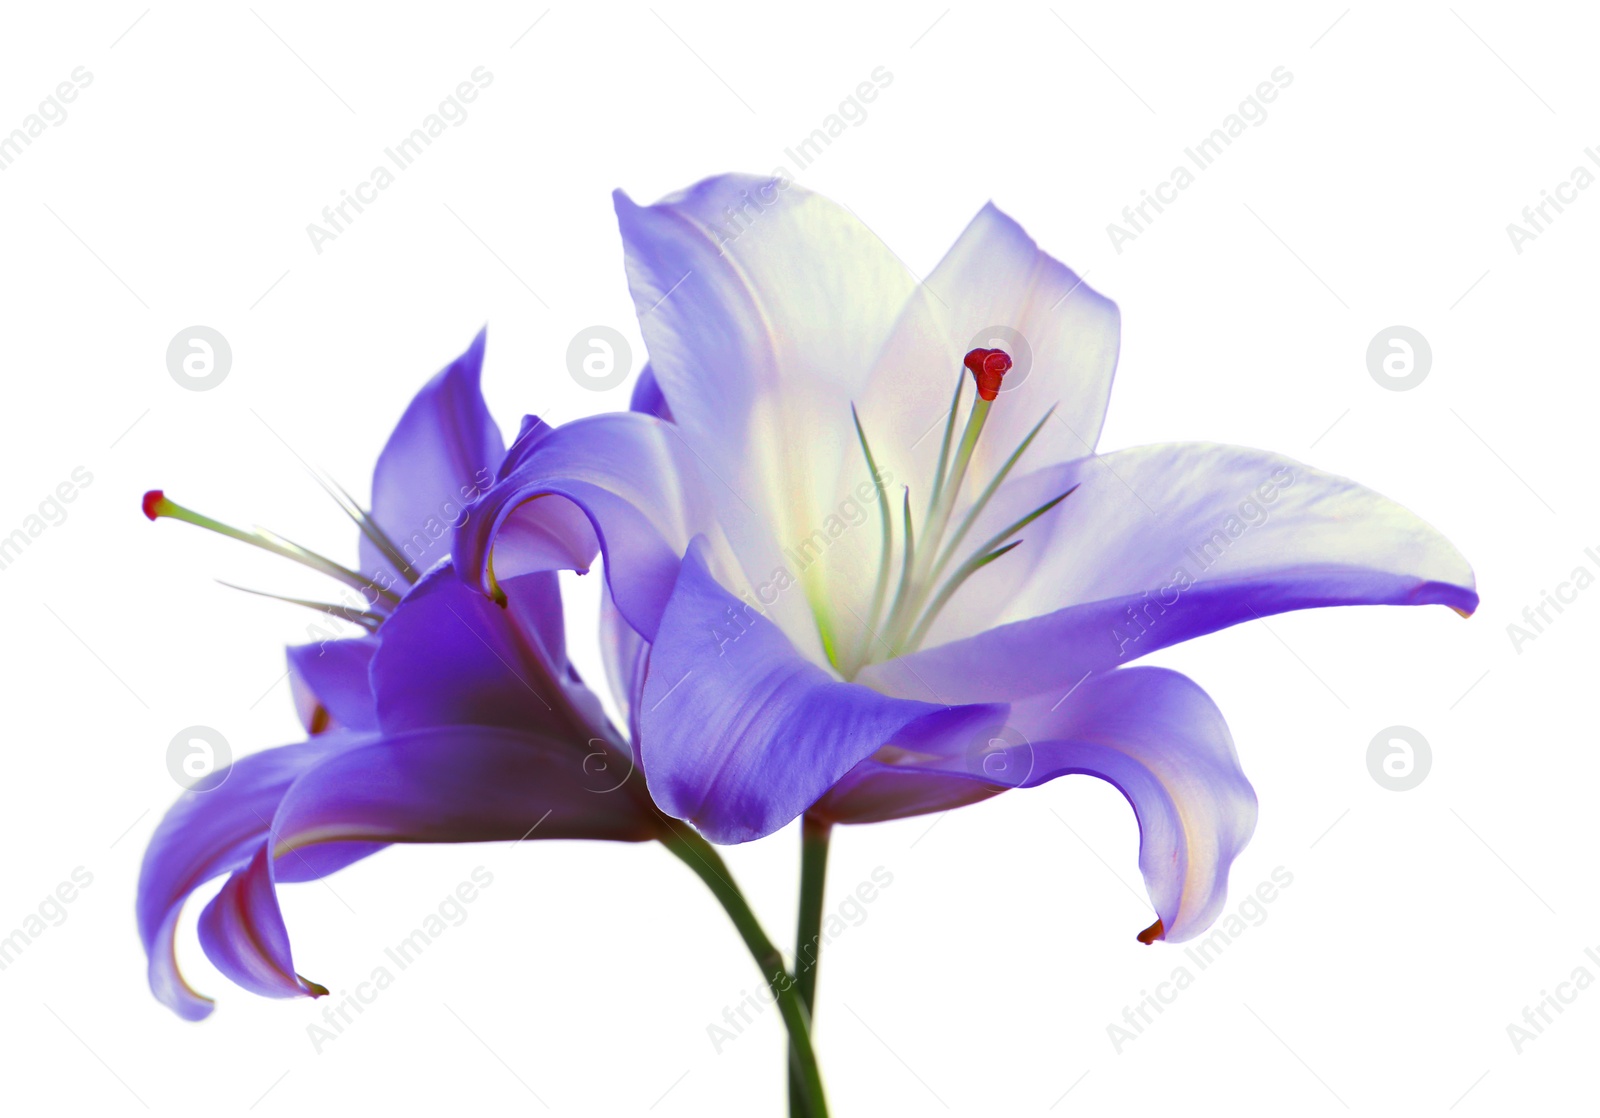 Image of Amazing violet lily flowers isolated on white